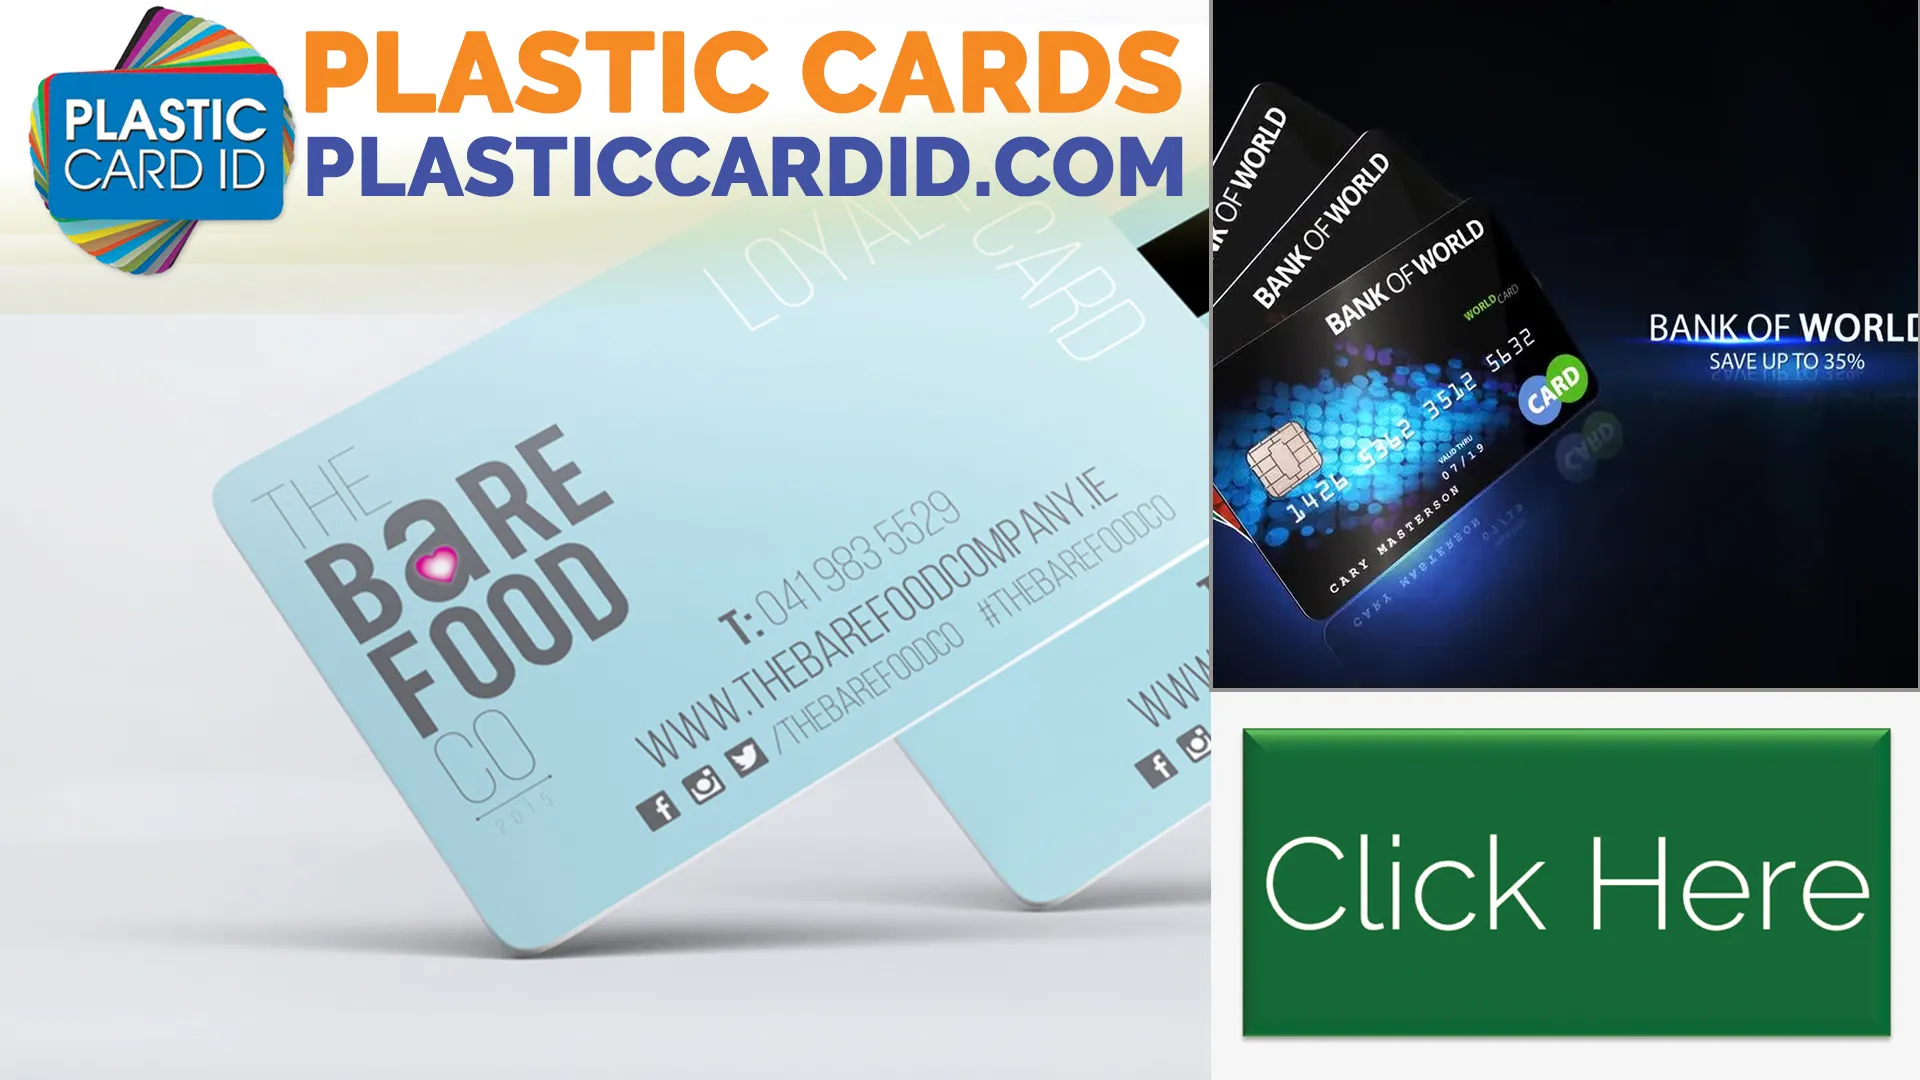 Maximizing Value: Cost-Efficiency with Plastic Card ID
